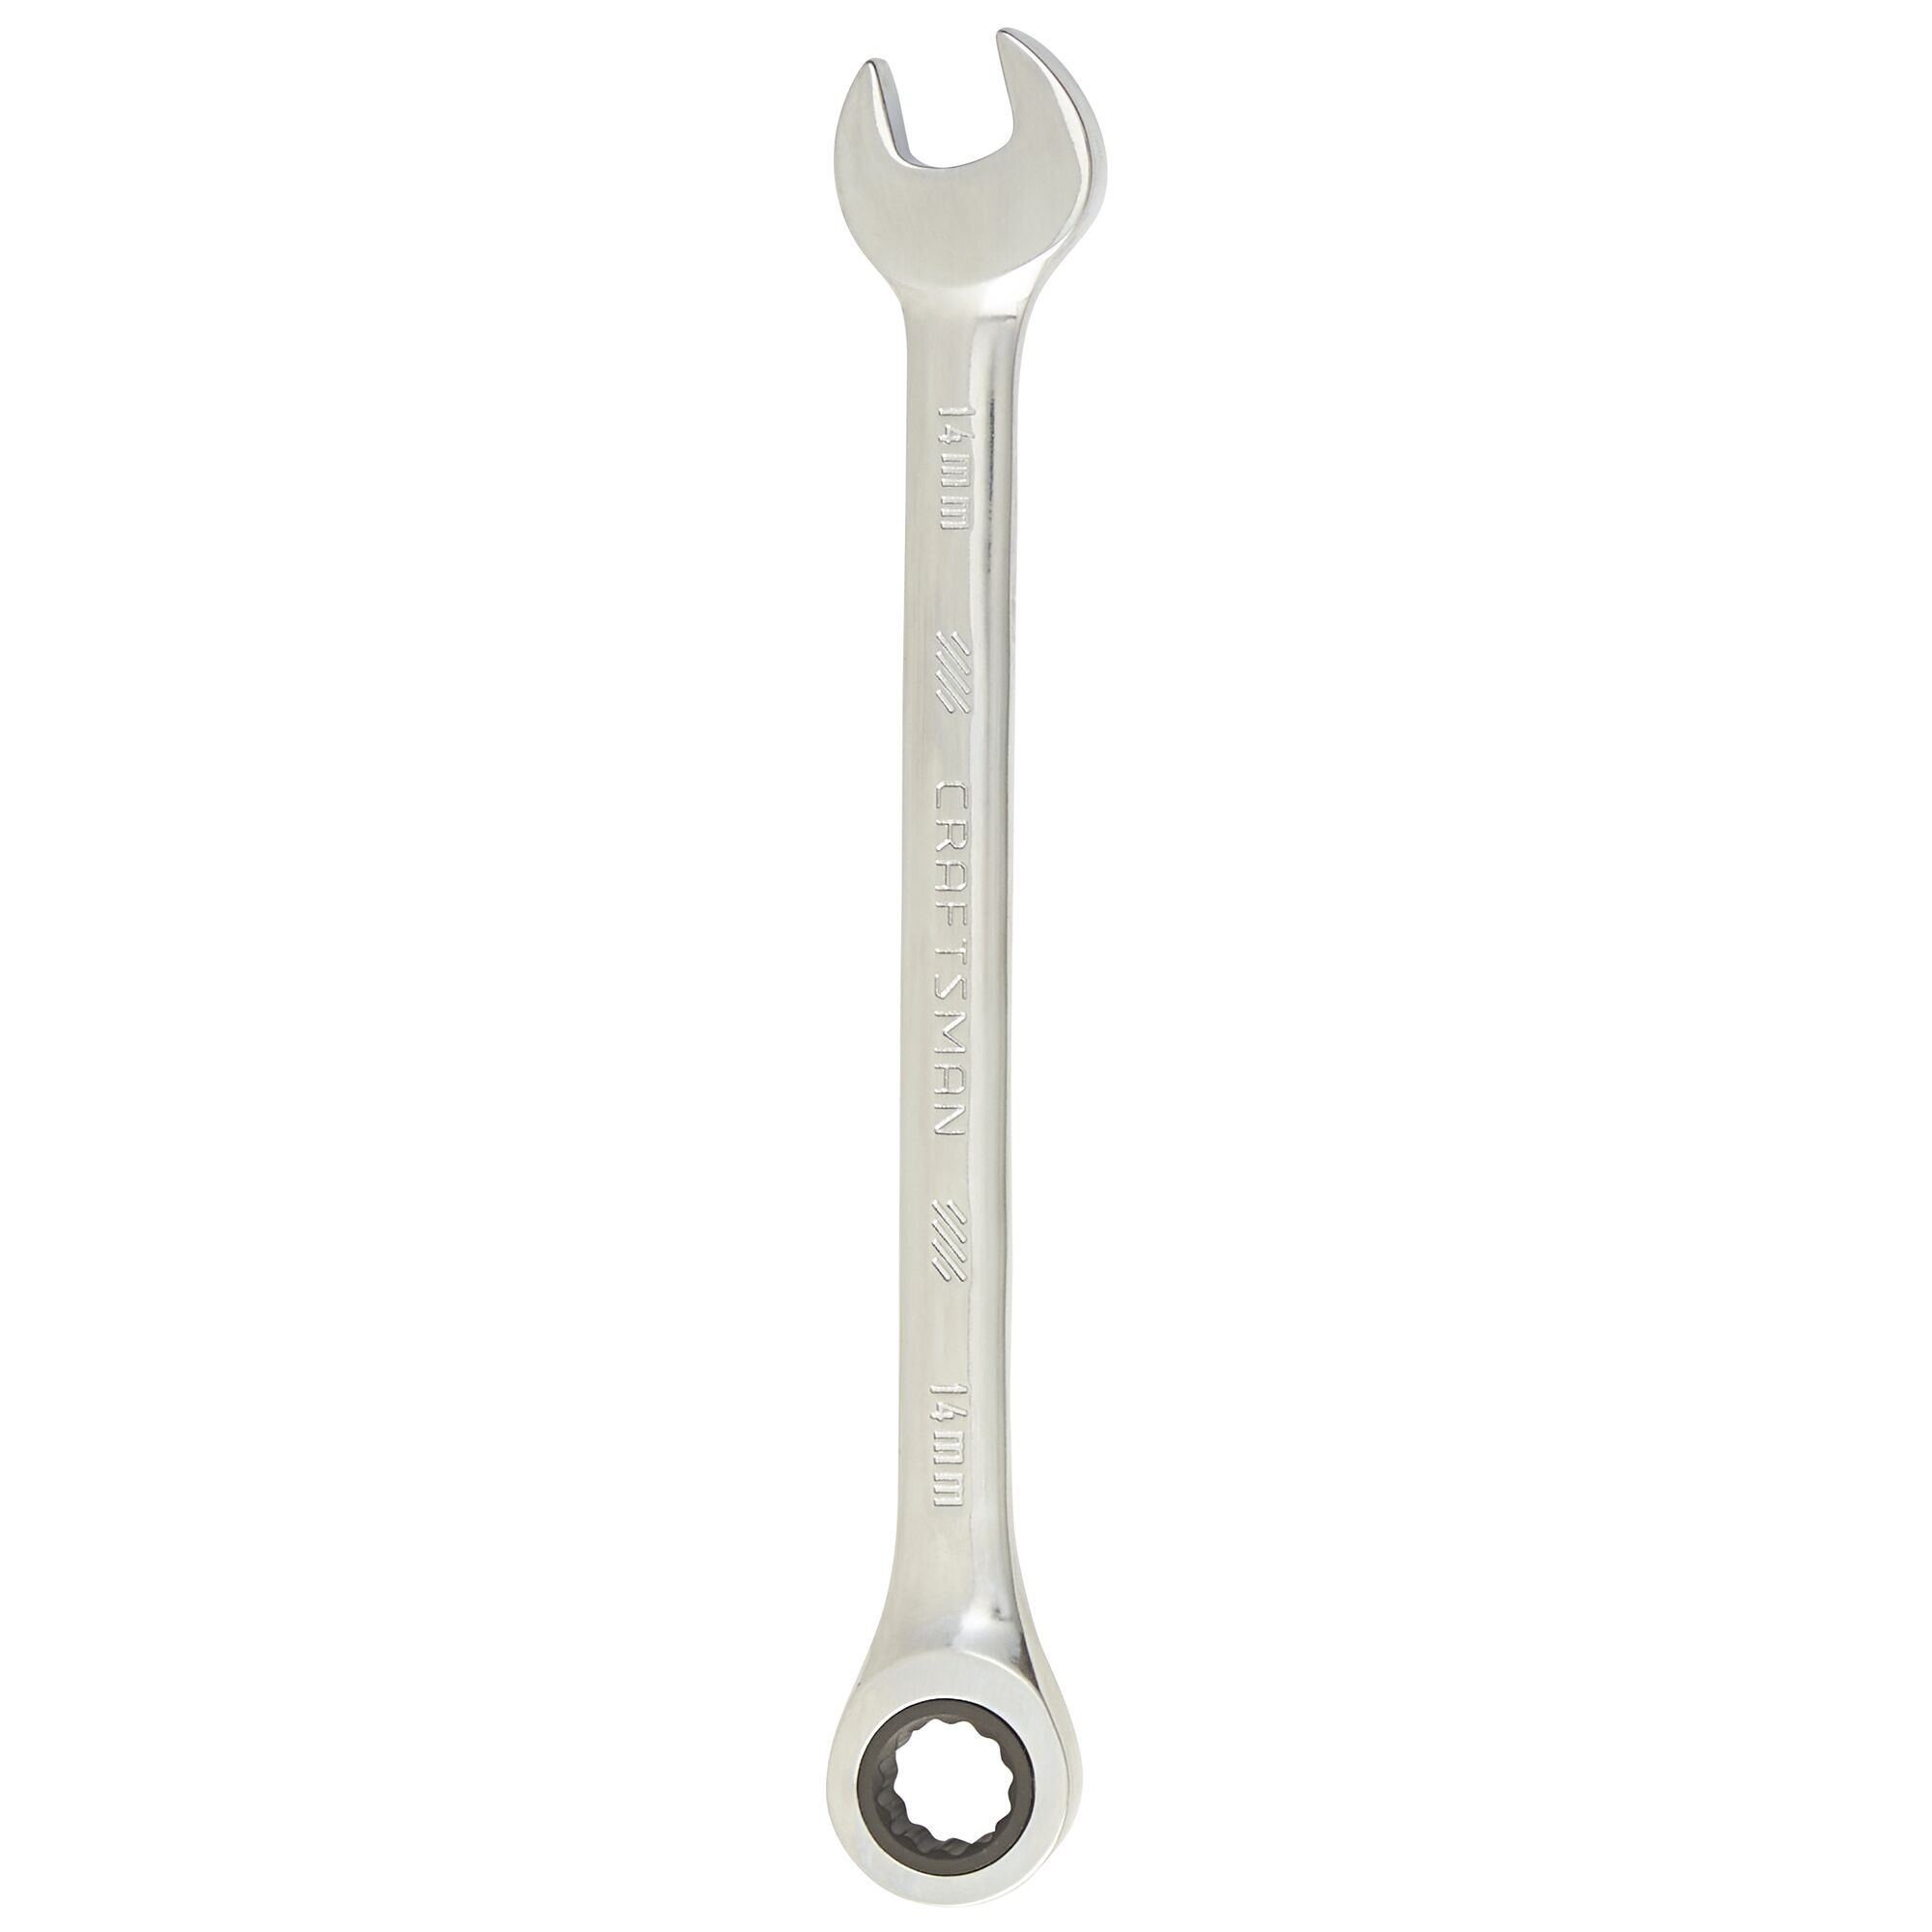 Upright front view of Craftsman 12 pt. Metric Ratchet Wrench